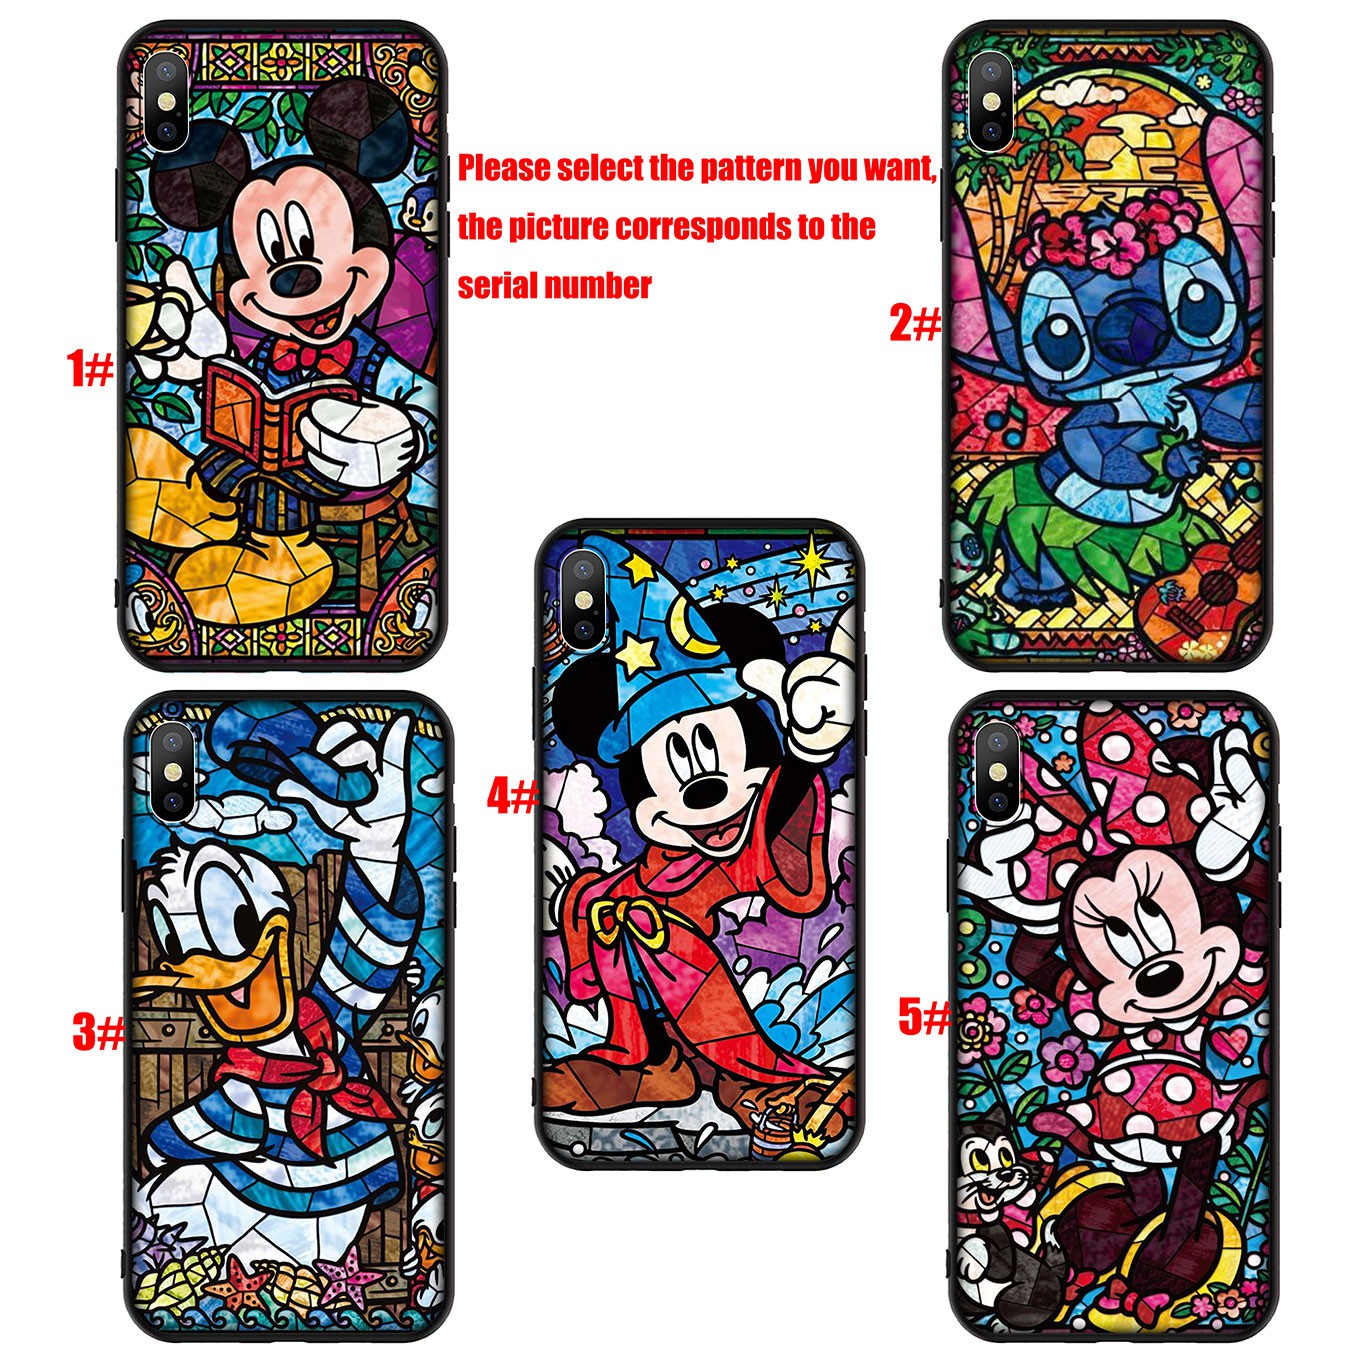 Samsung Galaxy S21 Ultra S8 Plus F62 M62 A2 A32 A52 A72 S21+ S8+ S21Plus Casing Soft Silicone Phone Case Mickey Mouse Stitch Cover